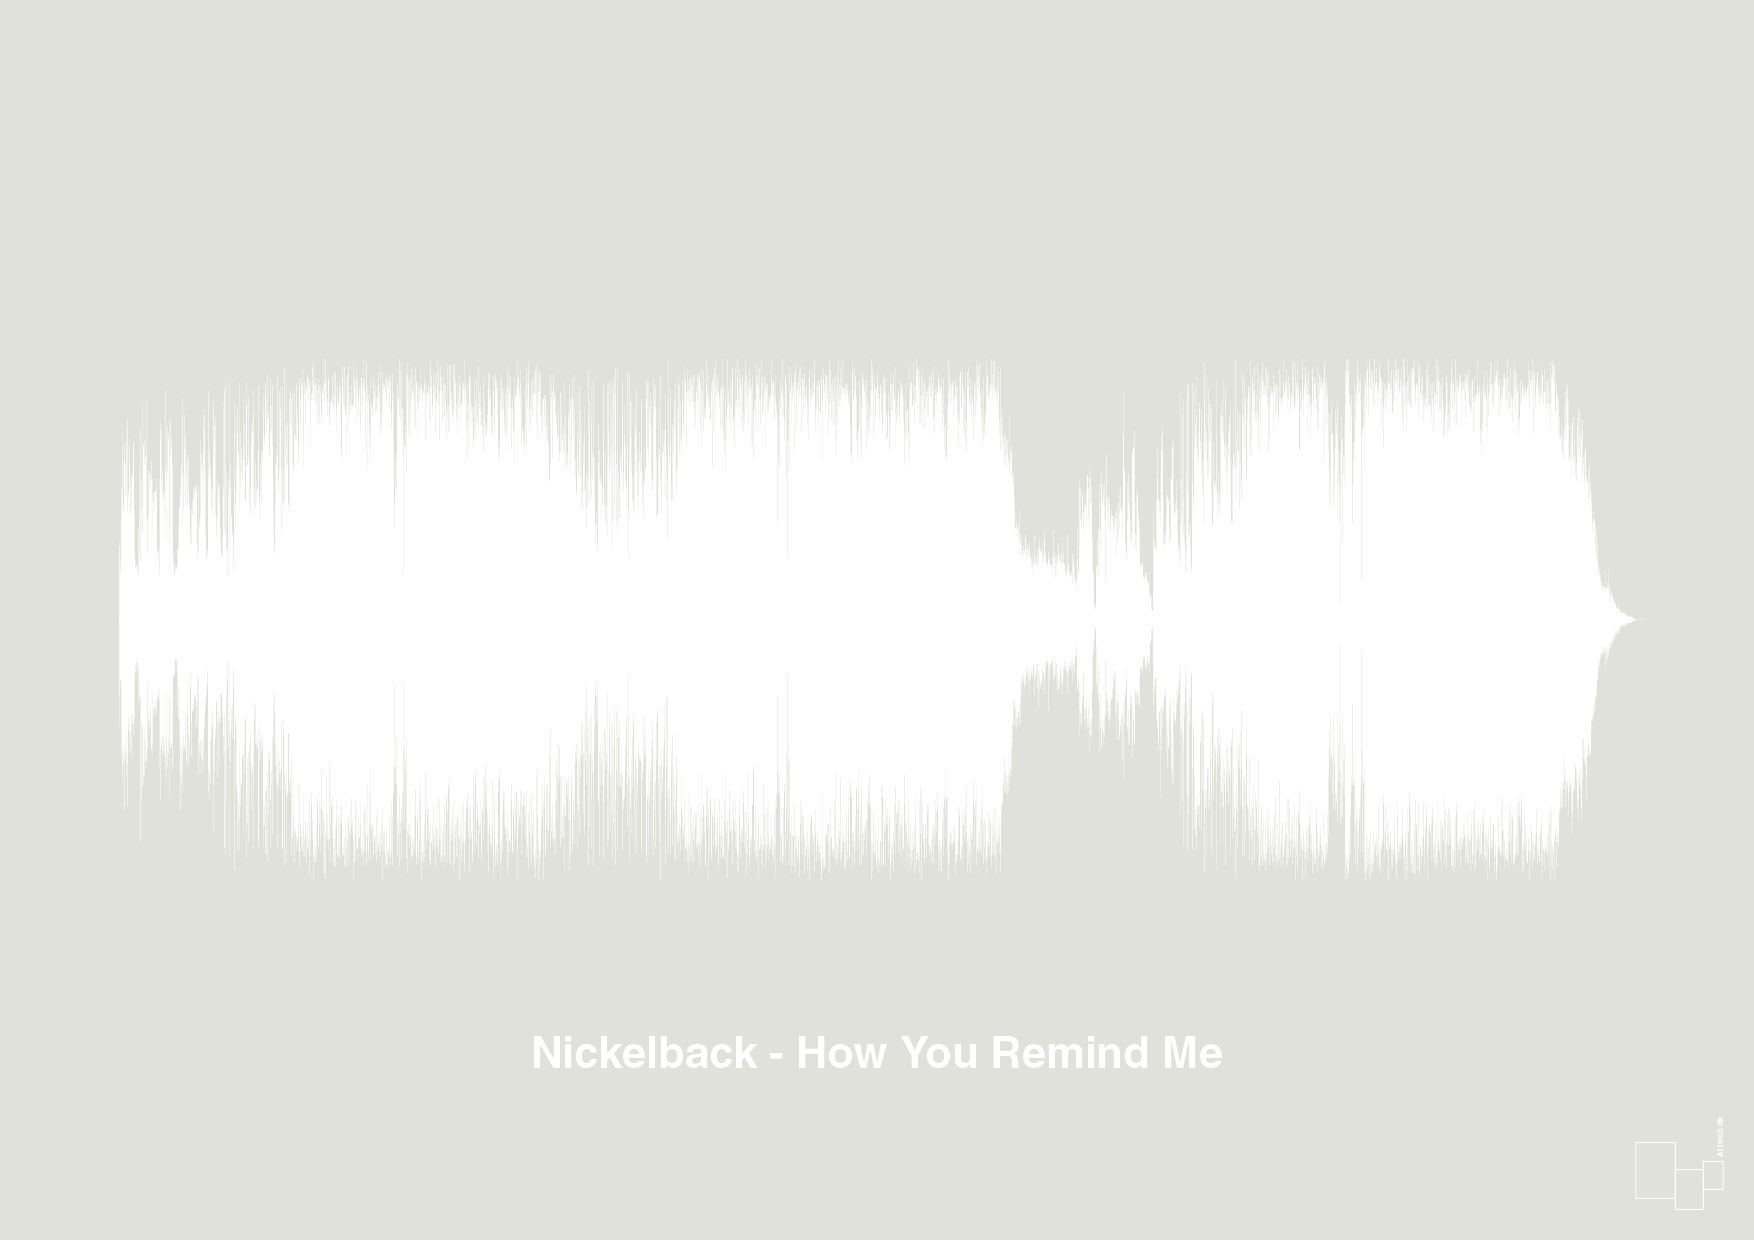 nickelback - how you remind me - Plakat med Musik i Painters White